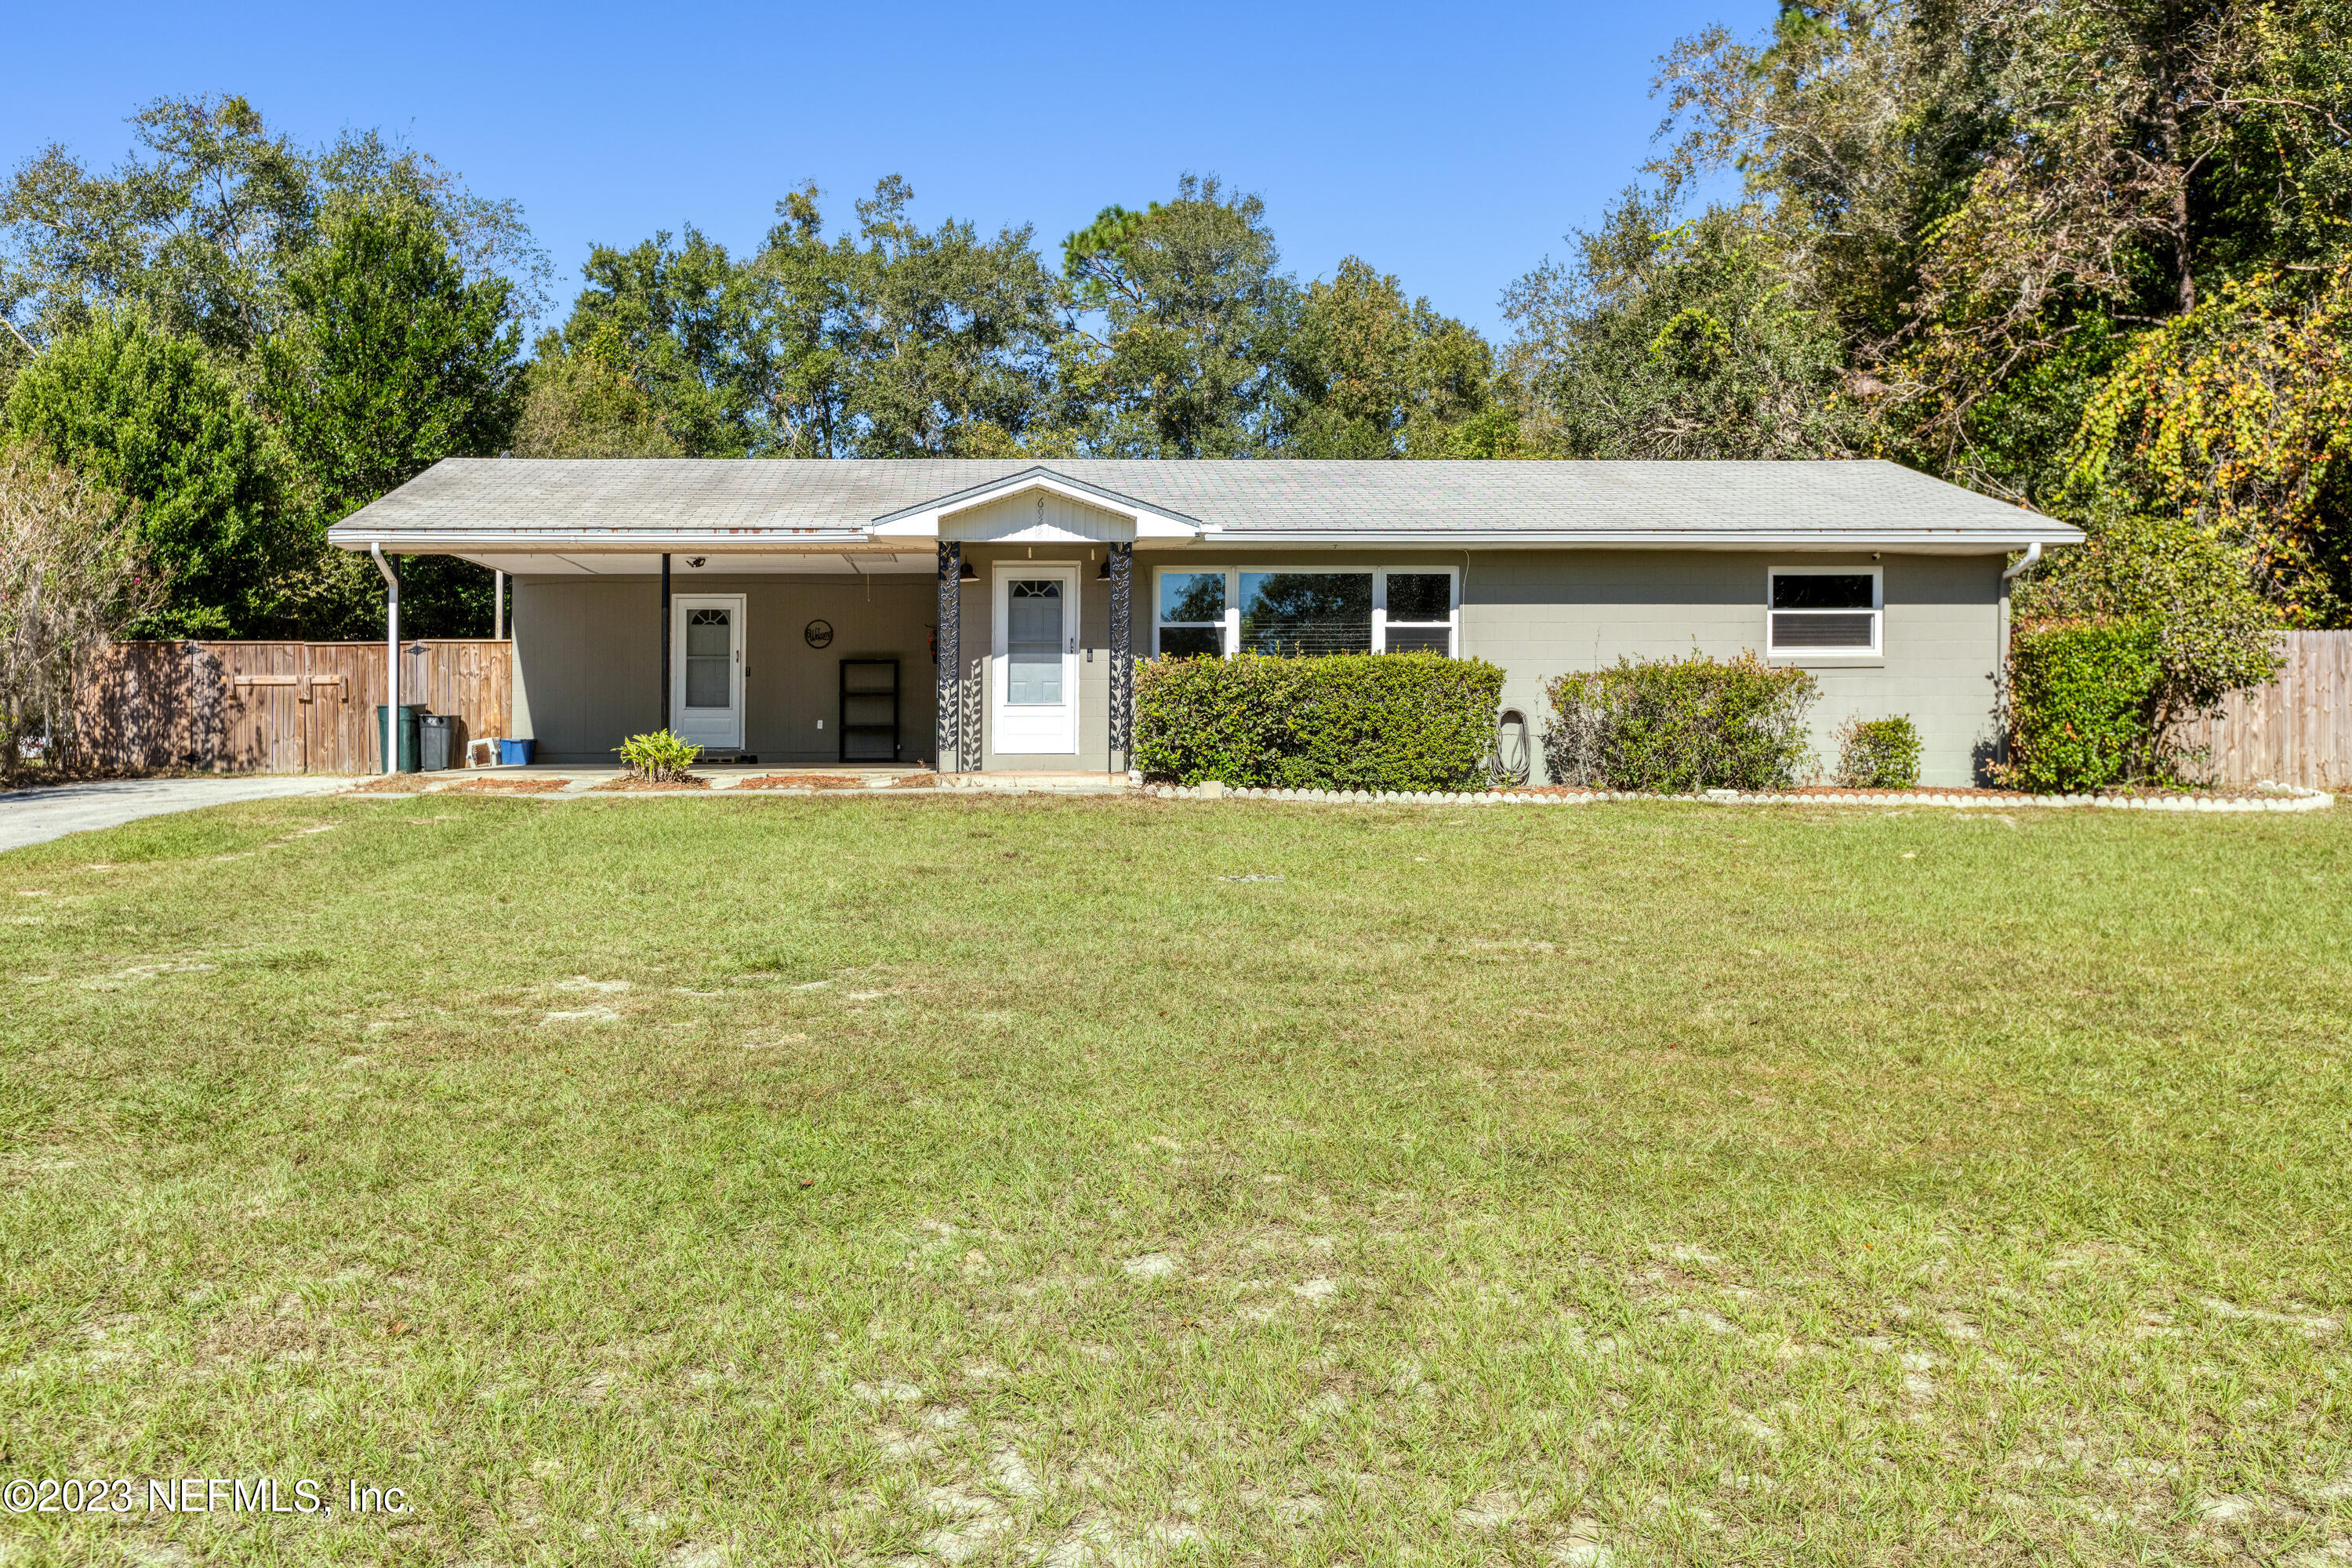 Keystone Heights, FL home for sale located at 6948 IMMOKALEE Road, Keystone Heights, FL 32656